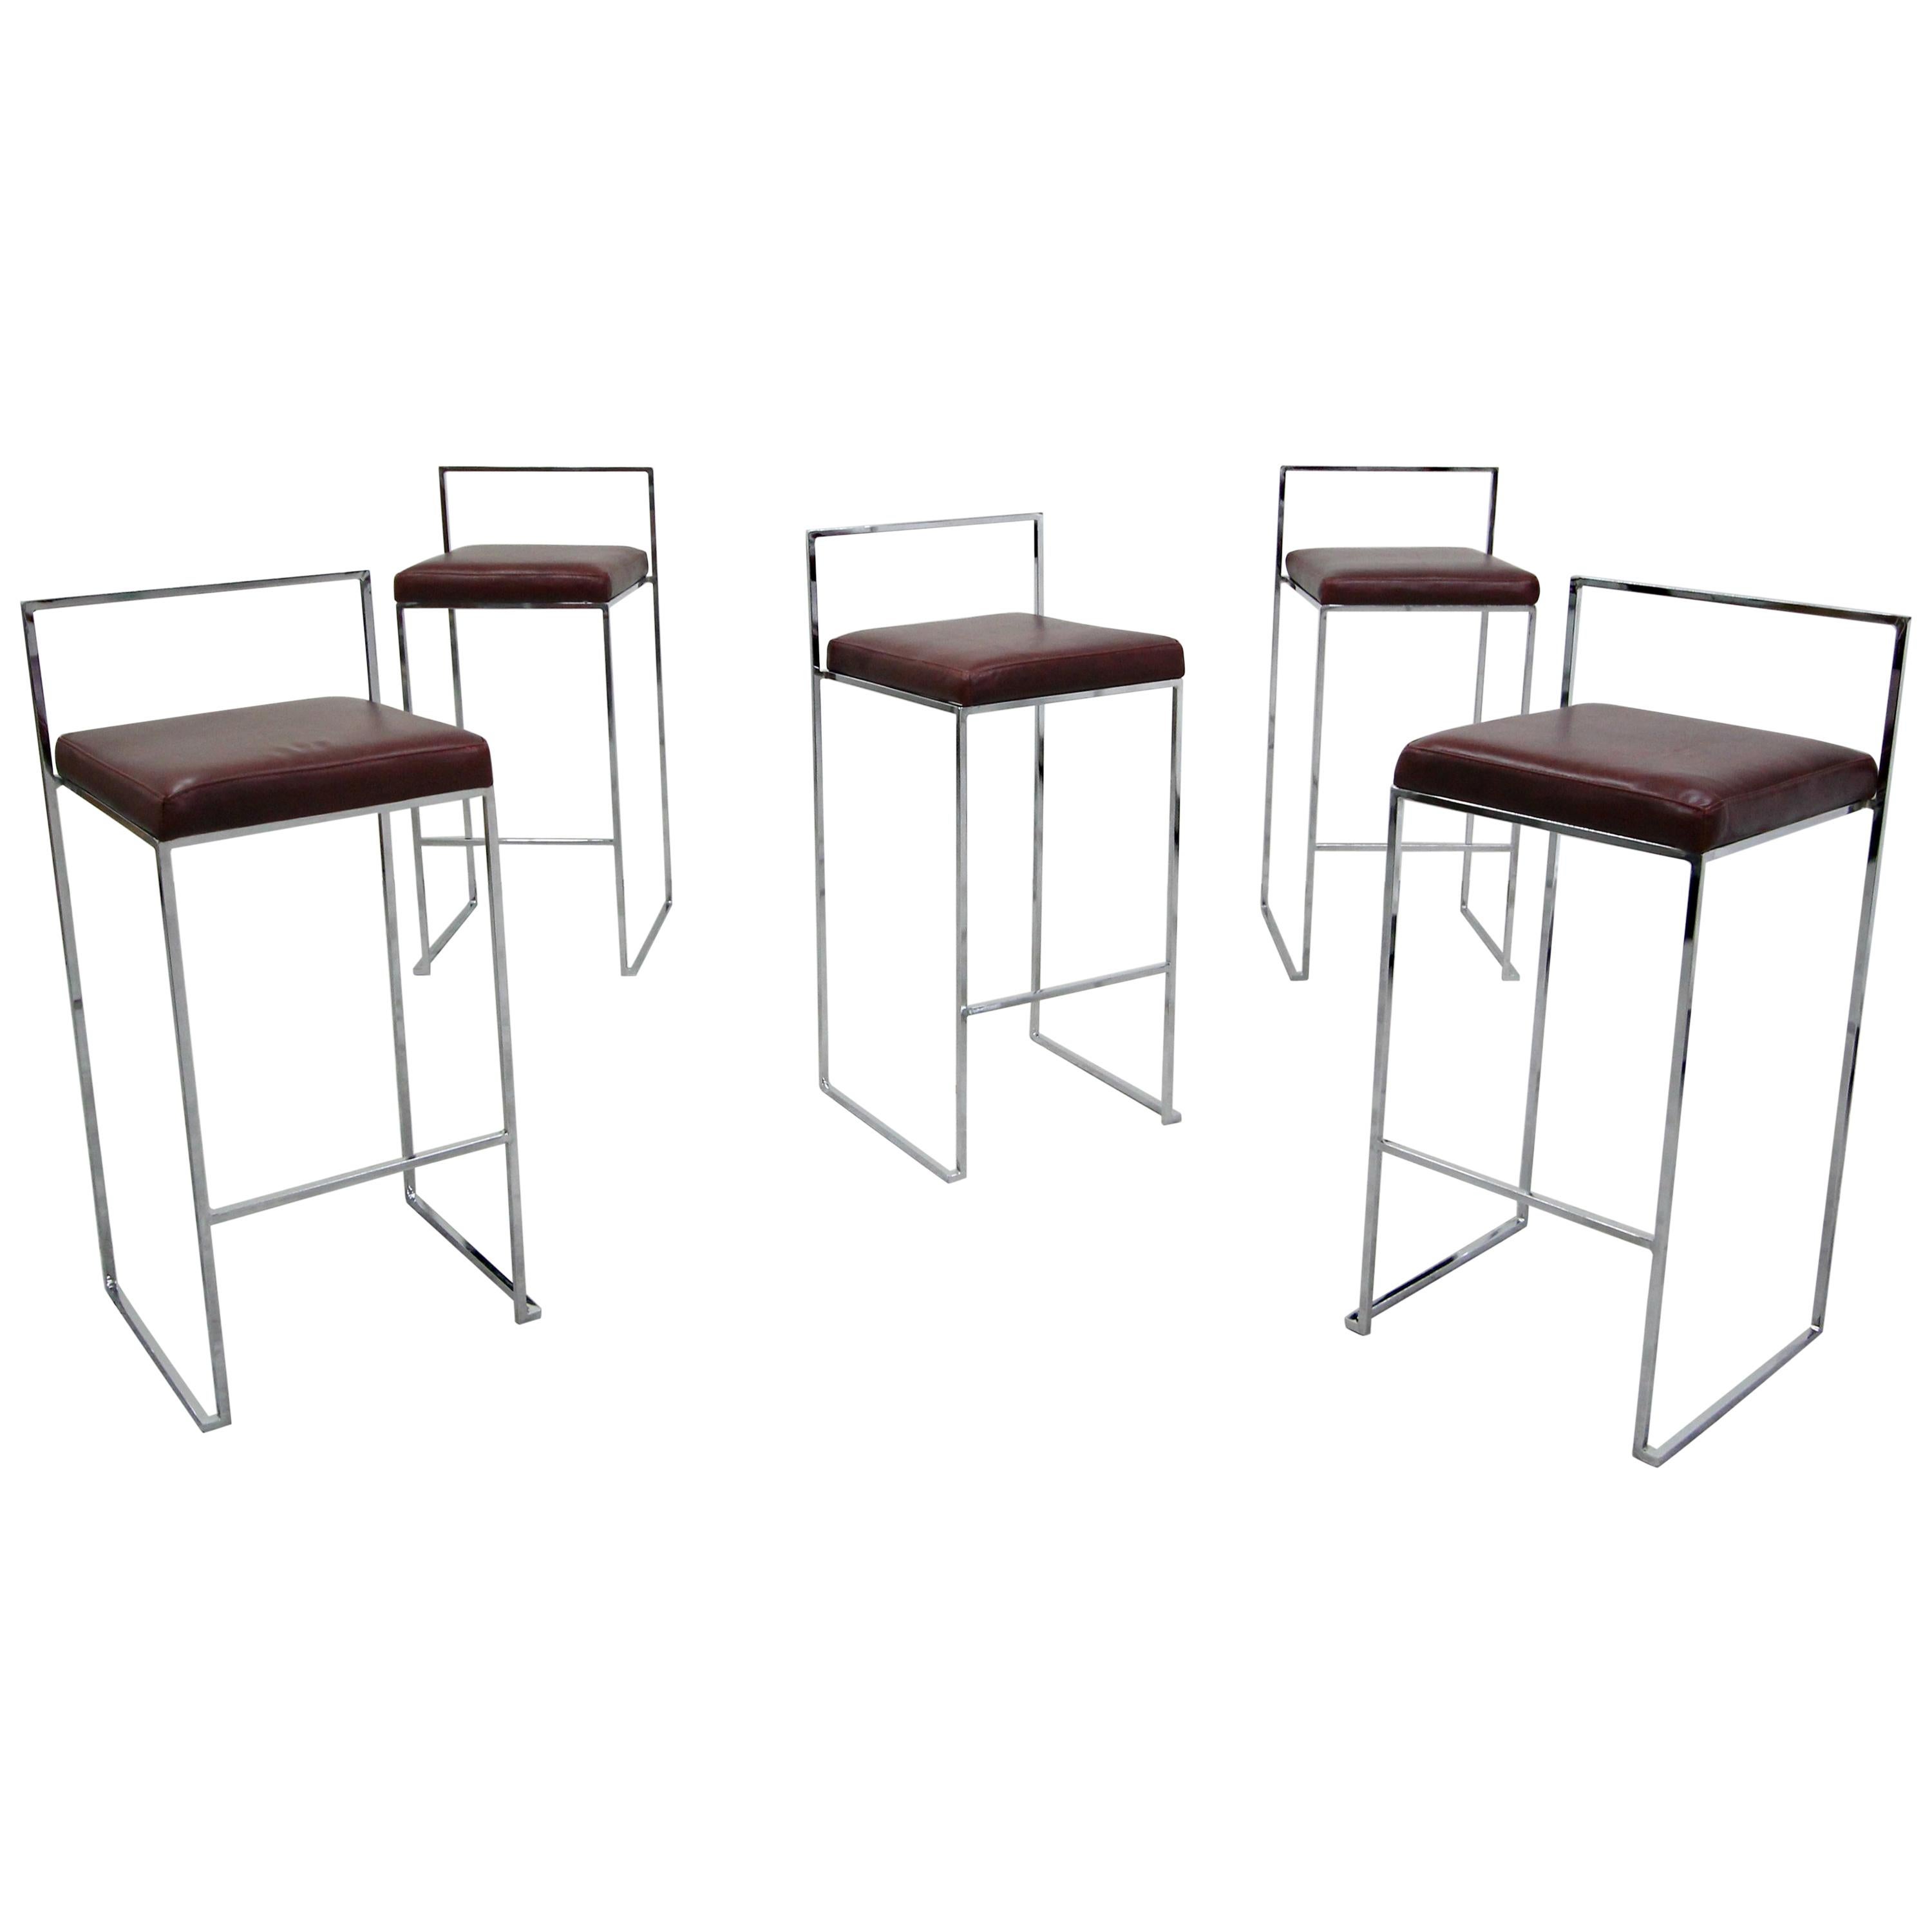 Set of Five Midcentury Thin Line Chrome and Leather Bar Stools by Milo Baughman